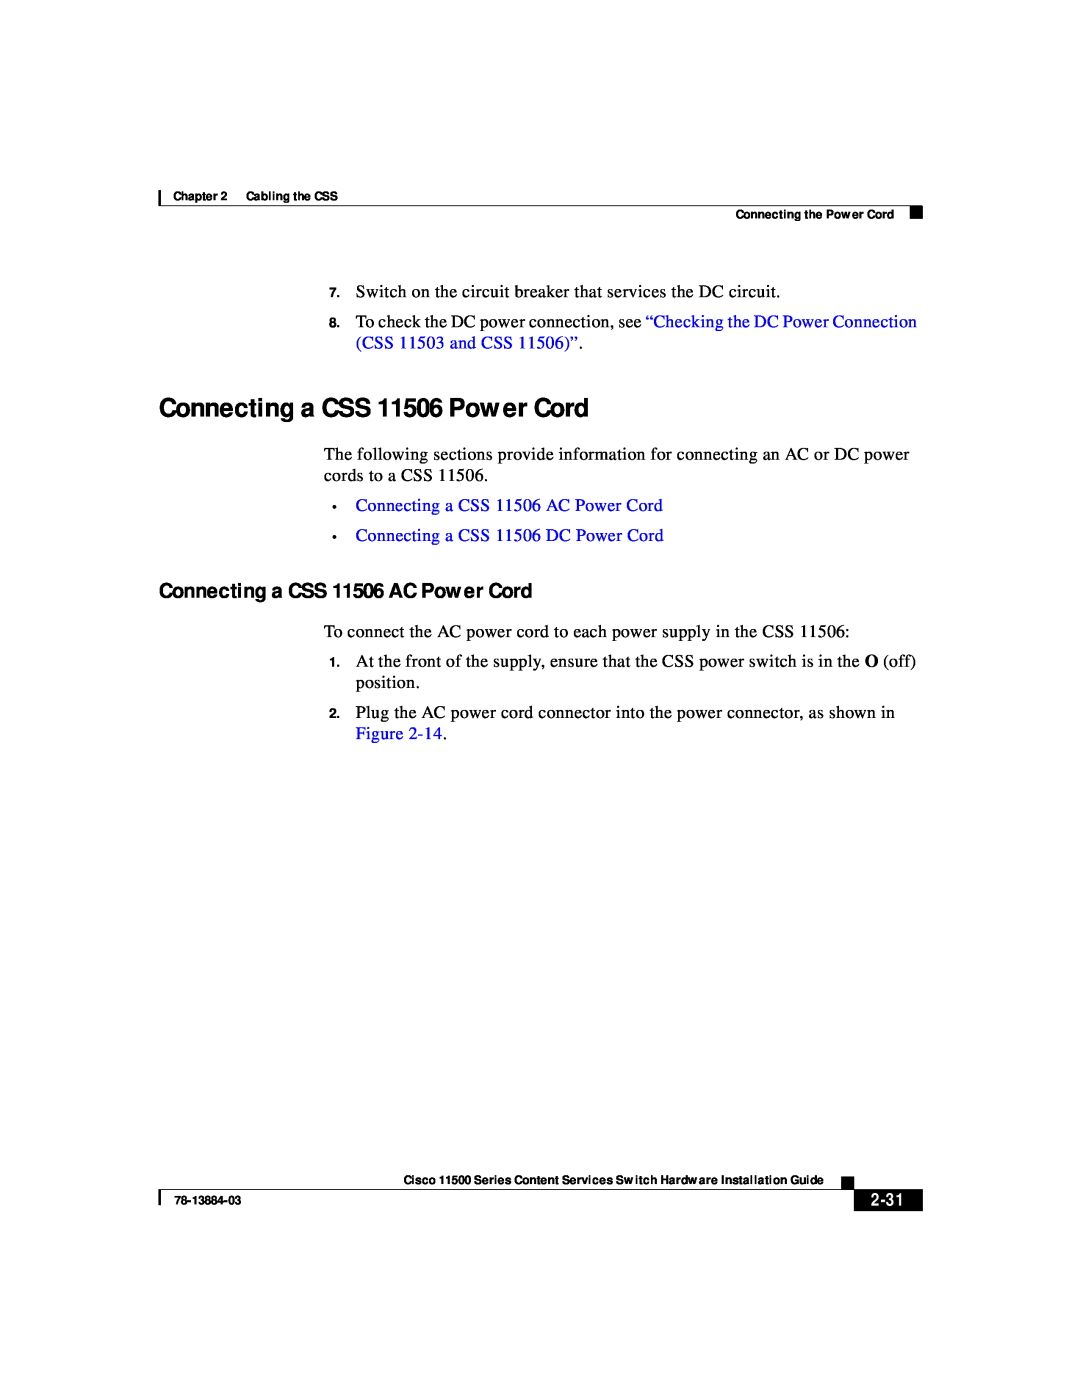 Cisco Systems 11500 Series manual Connecting a CSS 11506 Power Cord, Connecting a CSS 11506 AC Power Cord, 2-31 